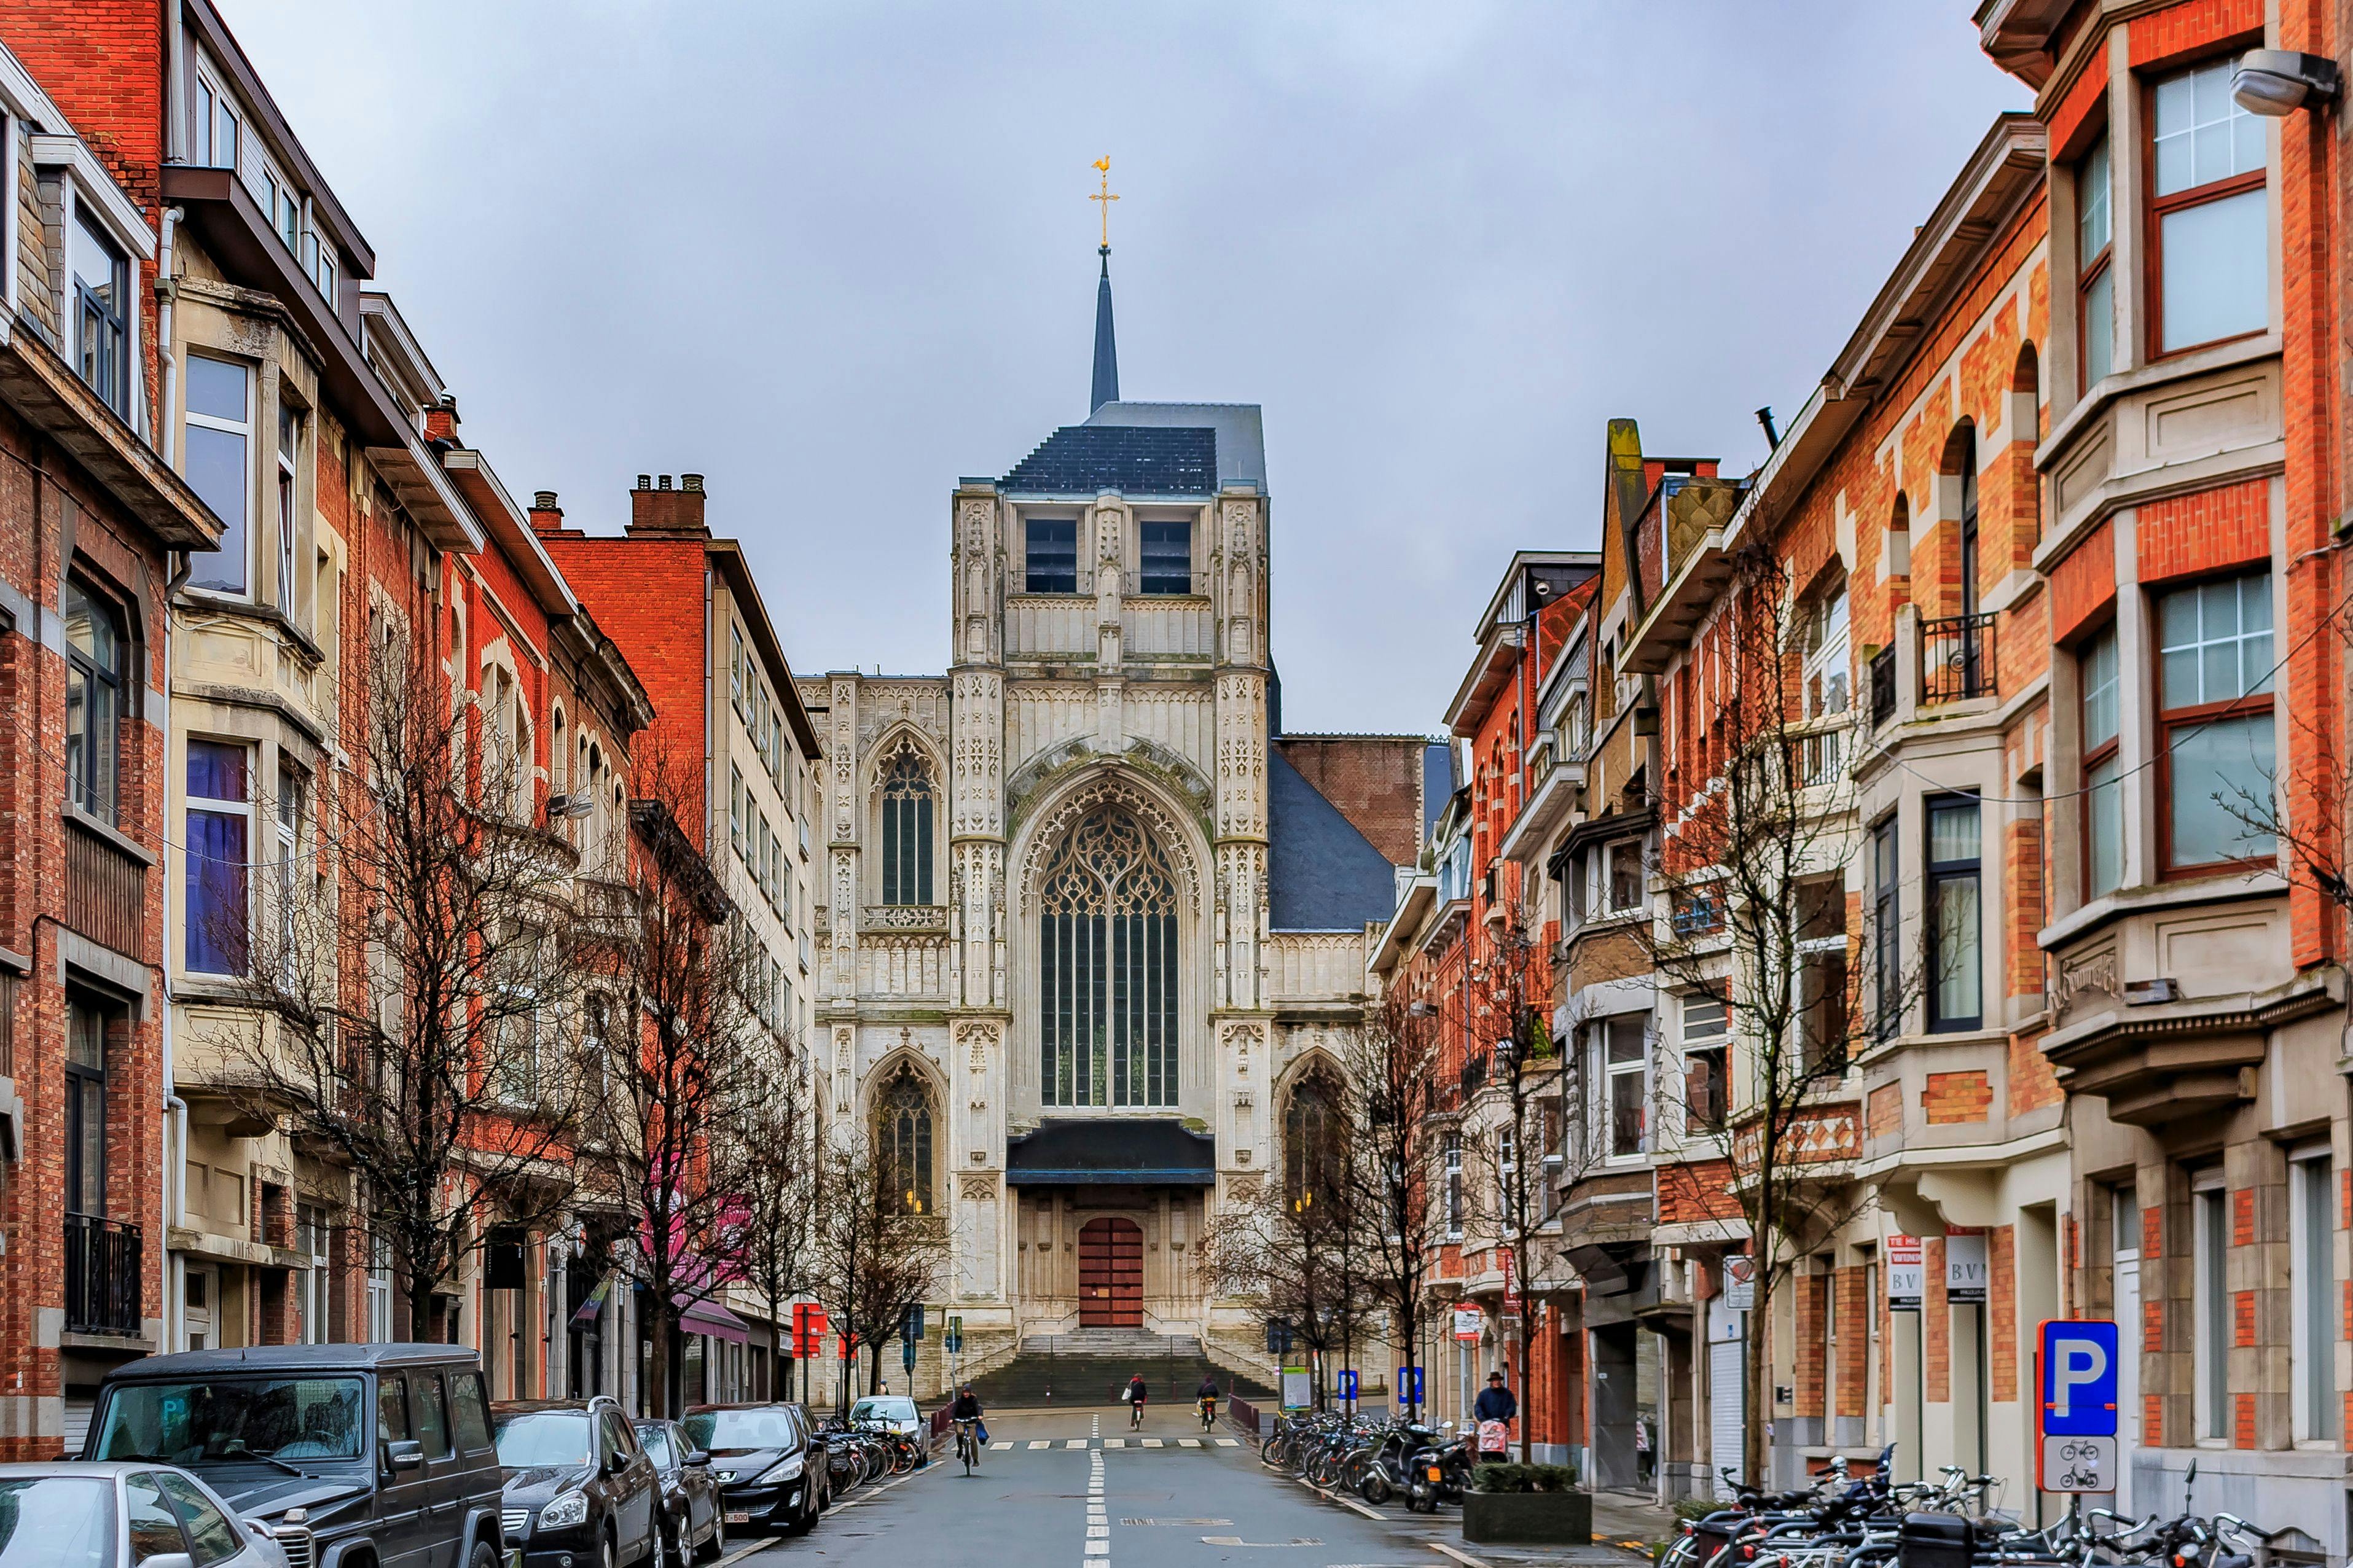 View on medieval St Peter's church and traditional brick houses in Leuven, Belgium | Image Credit: © SvetlanaSF - stock.adobe.com